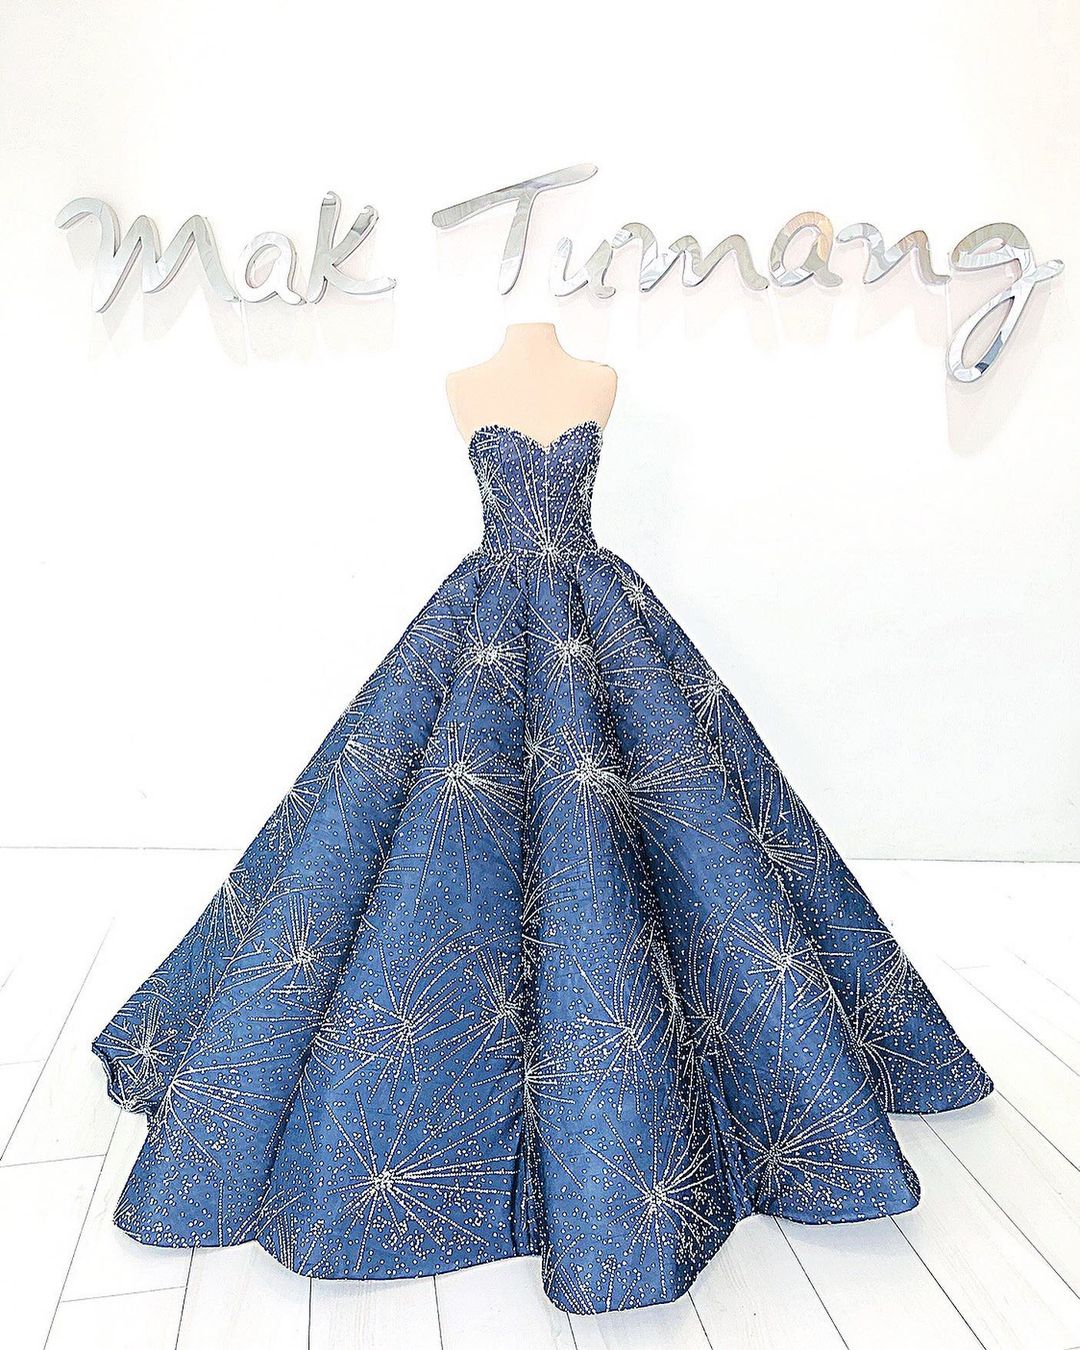 Mak Tumang Aliyah gown created in 2019 for a show